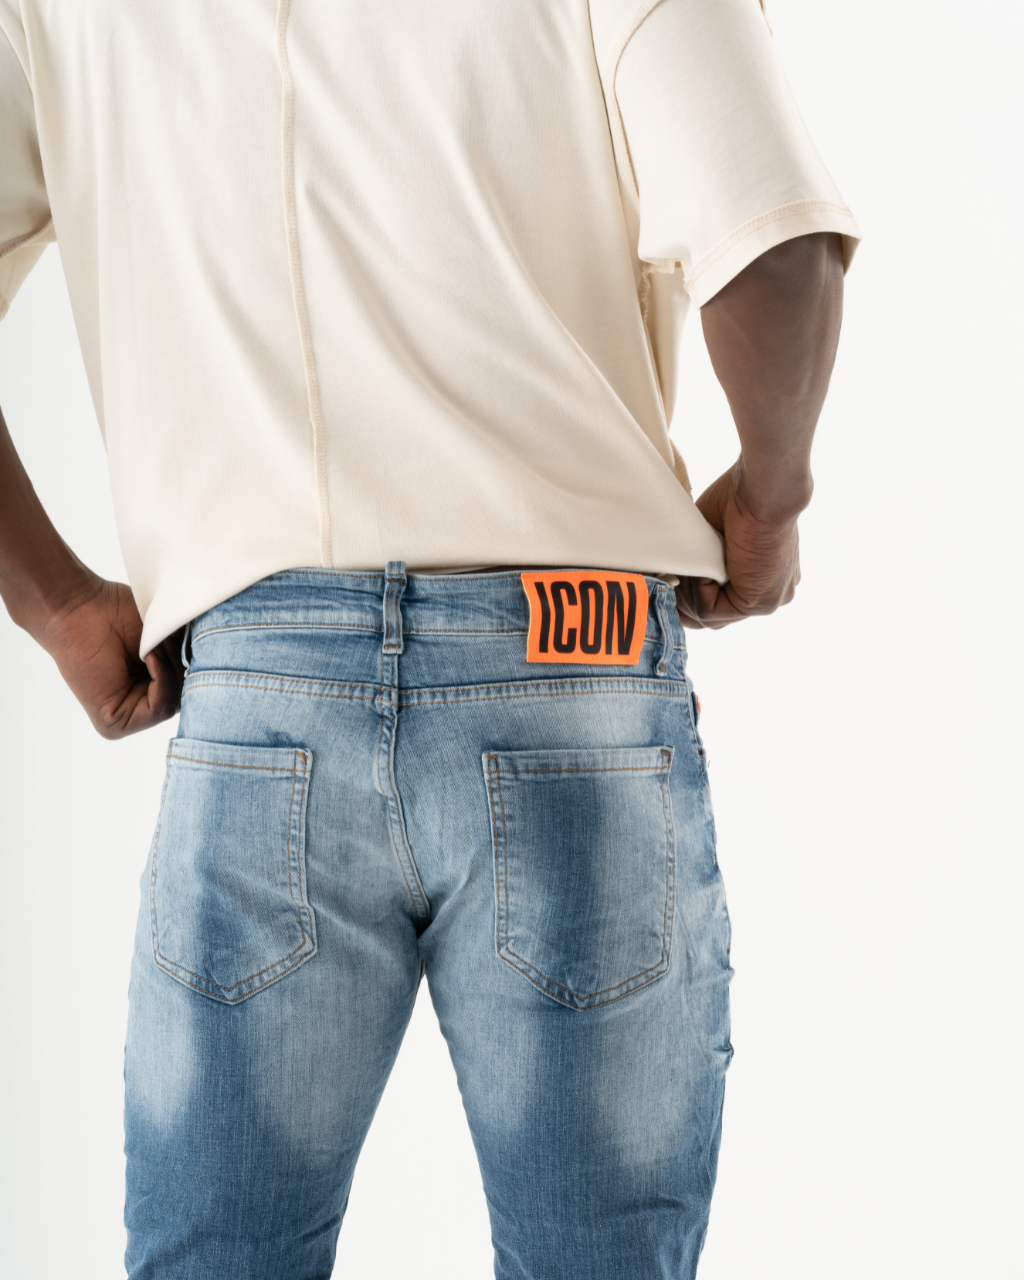 A man wearing a pair of ripped TEZAR jeans with an orange tag on the back.